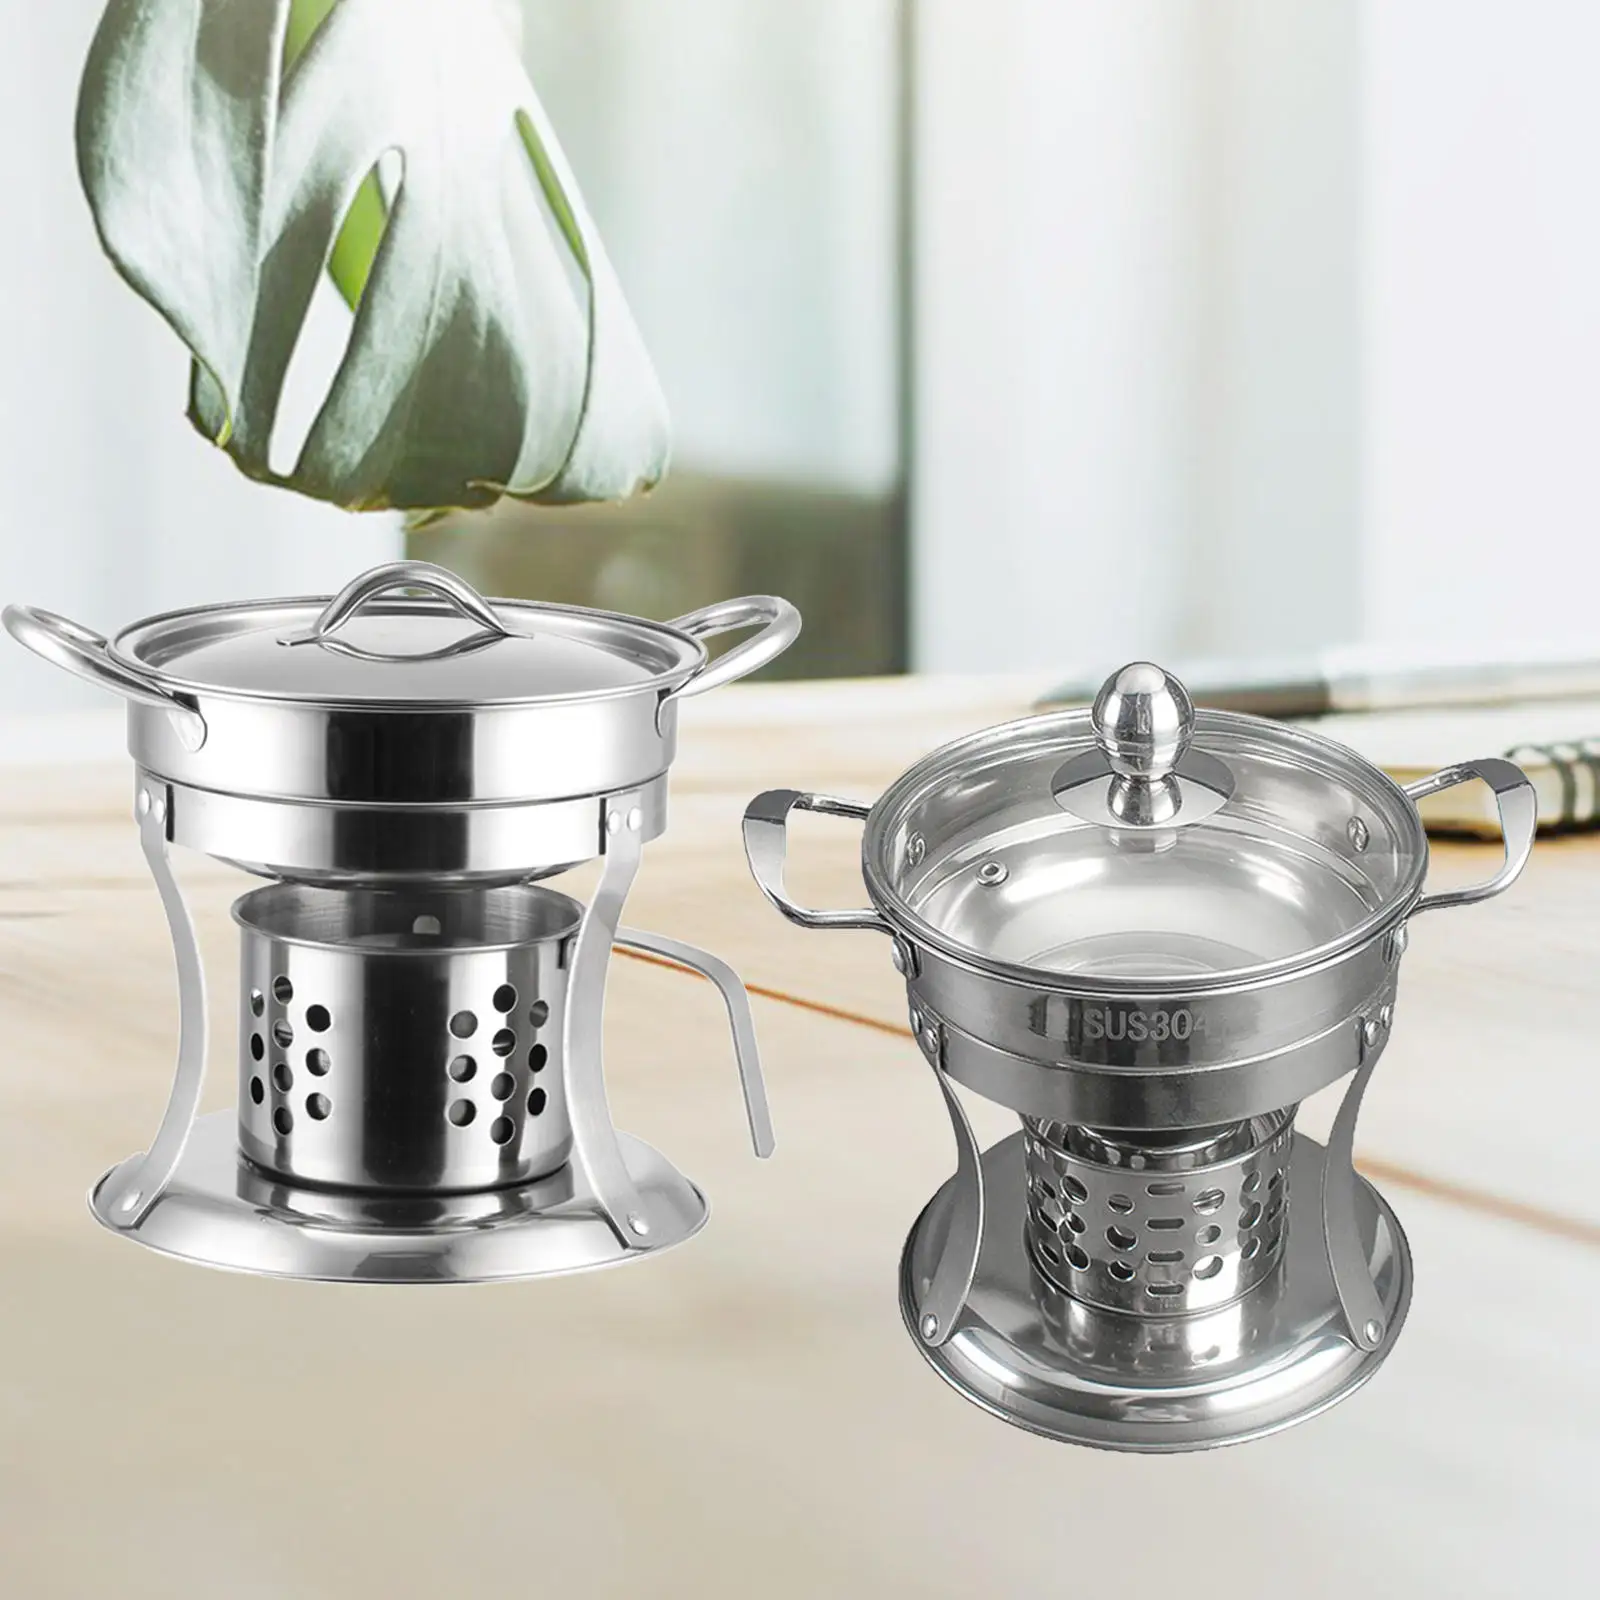 Portable Stainless Steel Alcohol Burner Stainless Steel Fondue Burner Chafing Dish Outdoor Camping Panic Cooking Pot Safe Fondue Fuel for Hot Pot Dry Pot Cuisine Buffet Etc. 